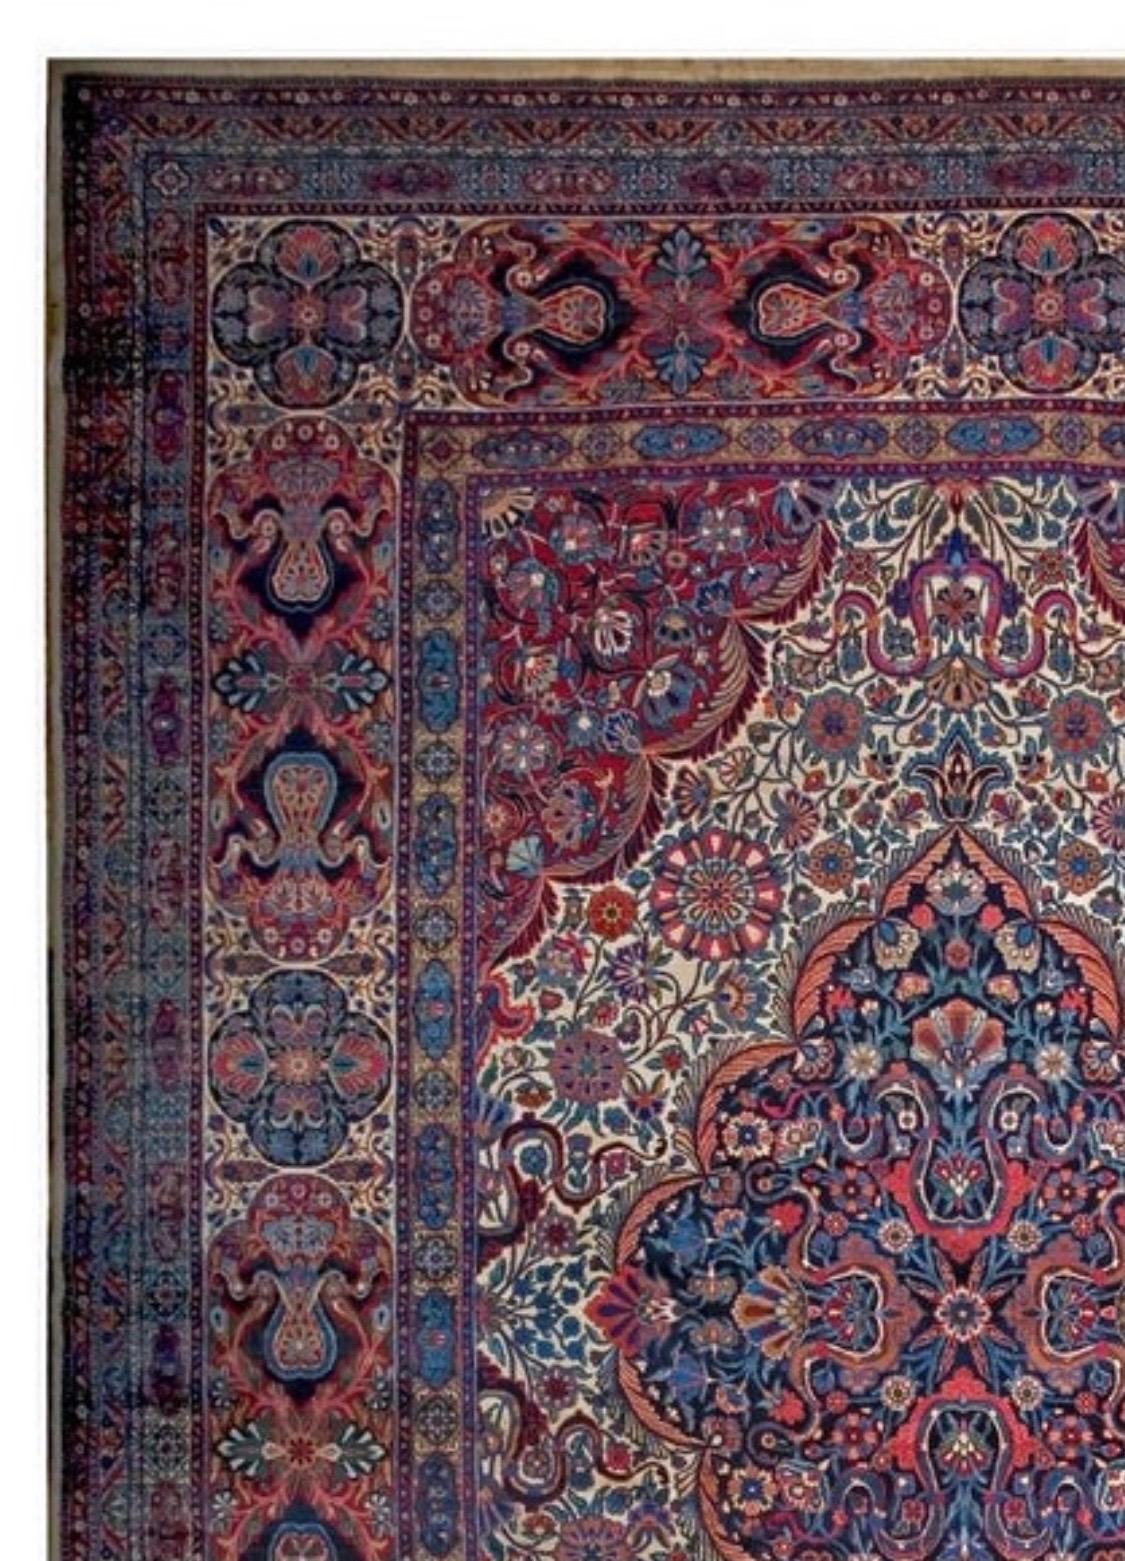 This is an exquisite antique oversize Persian Floral Kirman Lavar rug, circa 1910-1920s, measuring 19.3 x 30 ft in pristine condition. 

Provenance:
Sotheby's Auction House, New York, NY in fall 2001

The carpets produced in Lavar are often